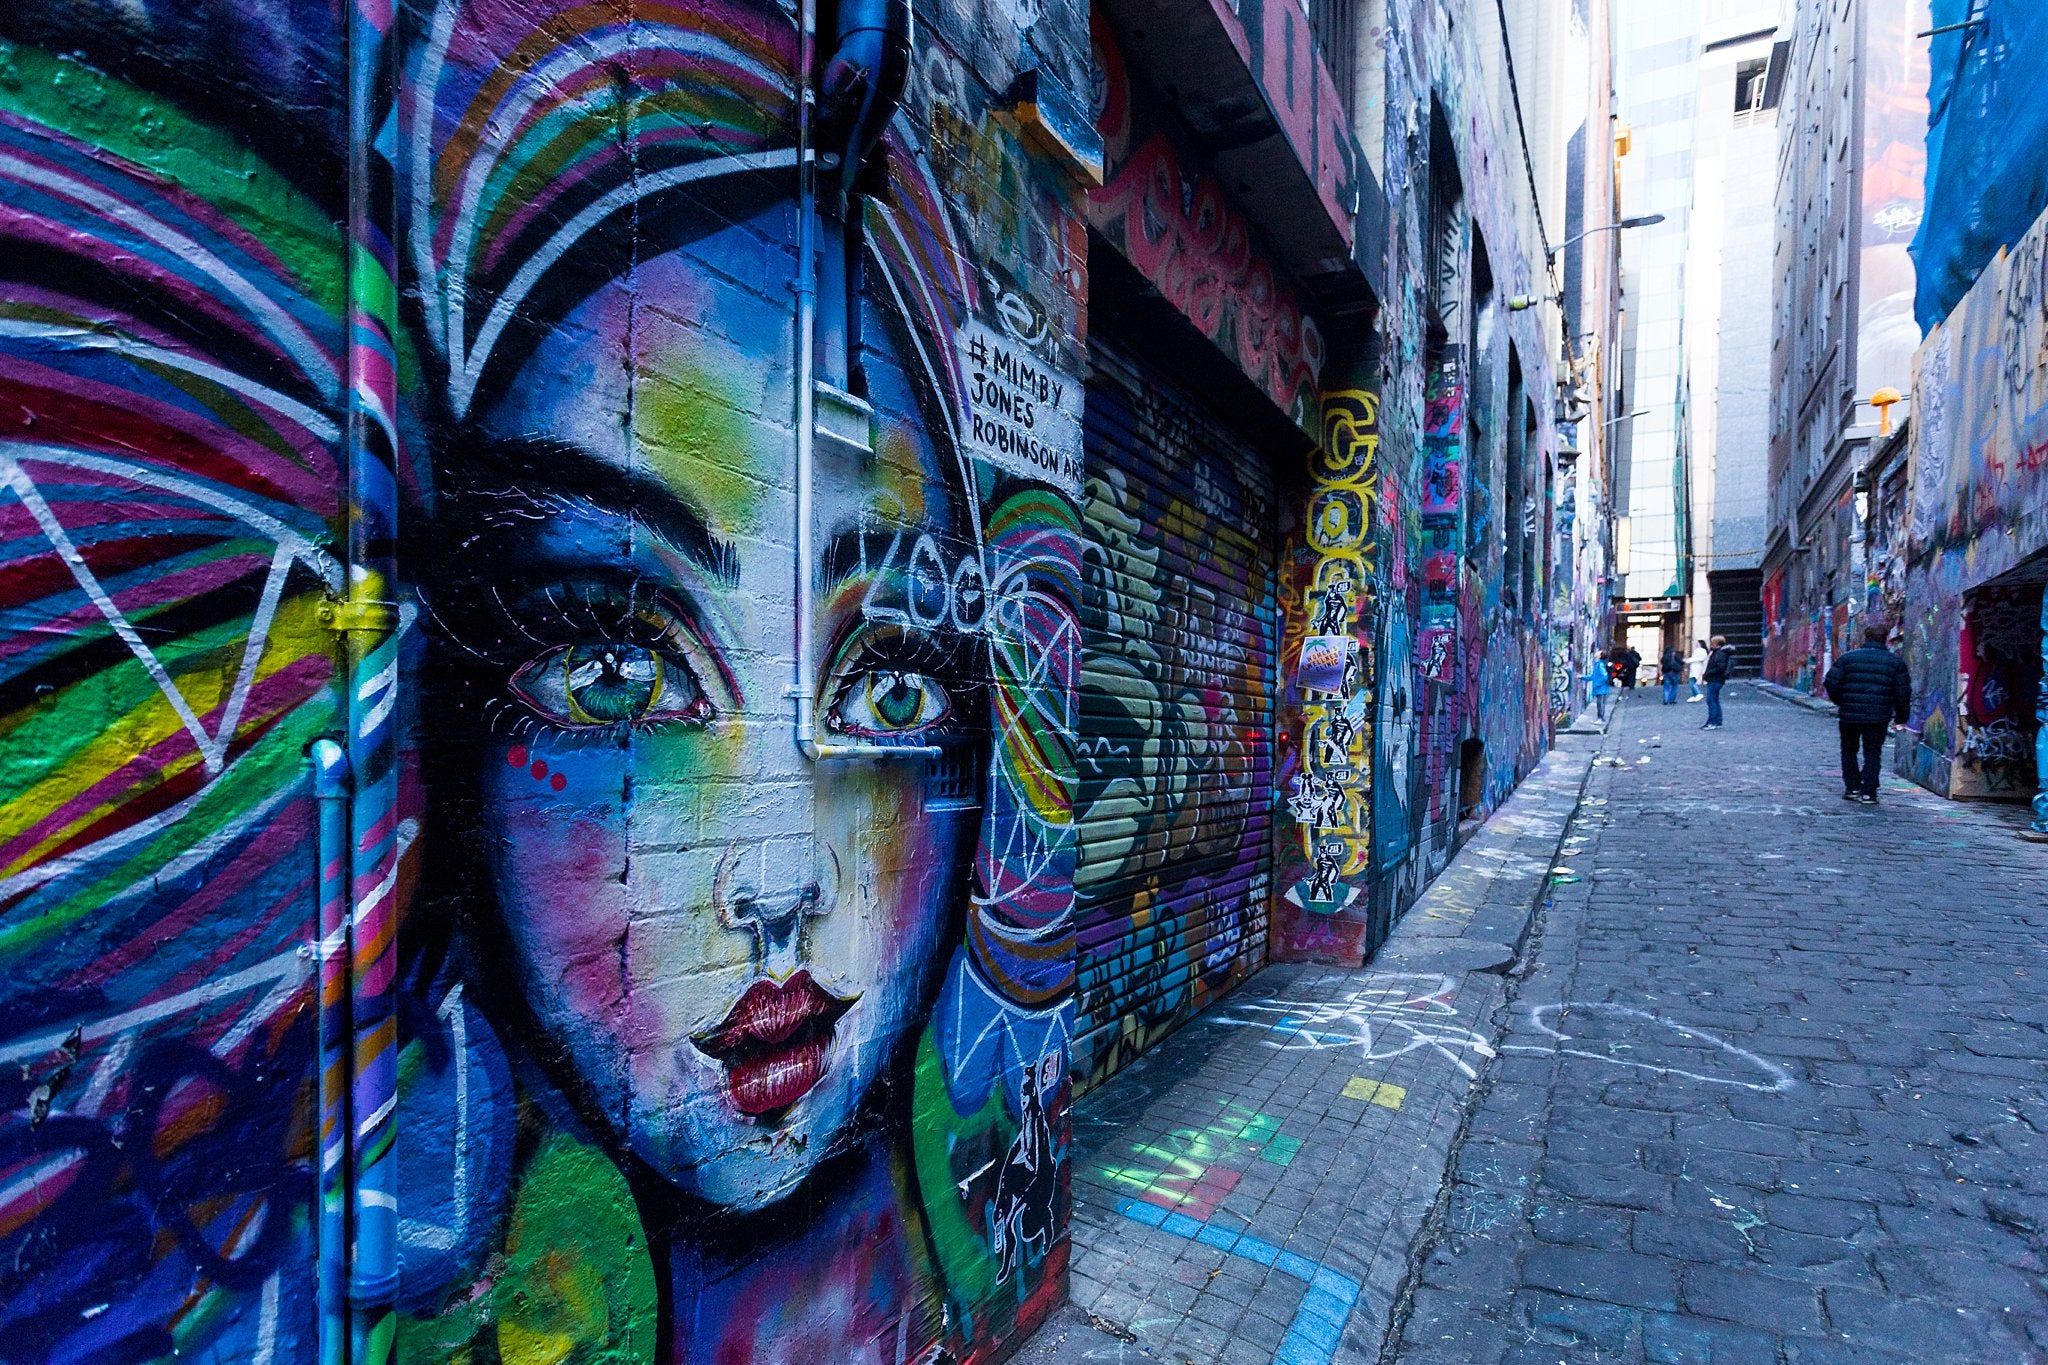 Getting lost in the lanes in Melbourne